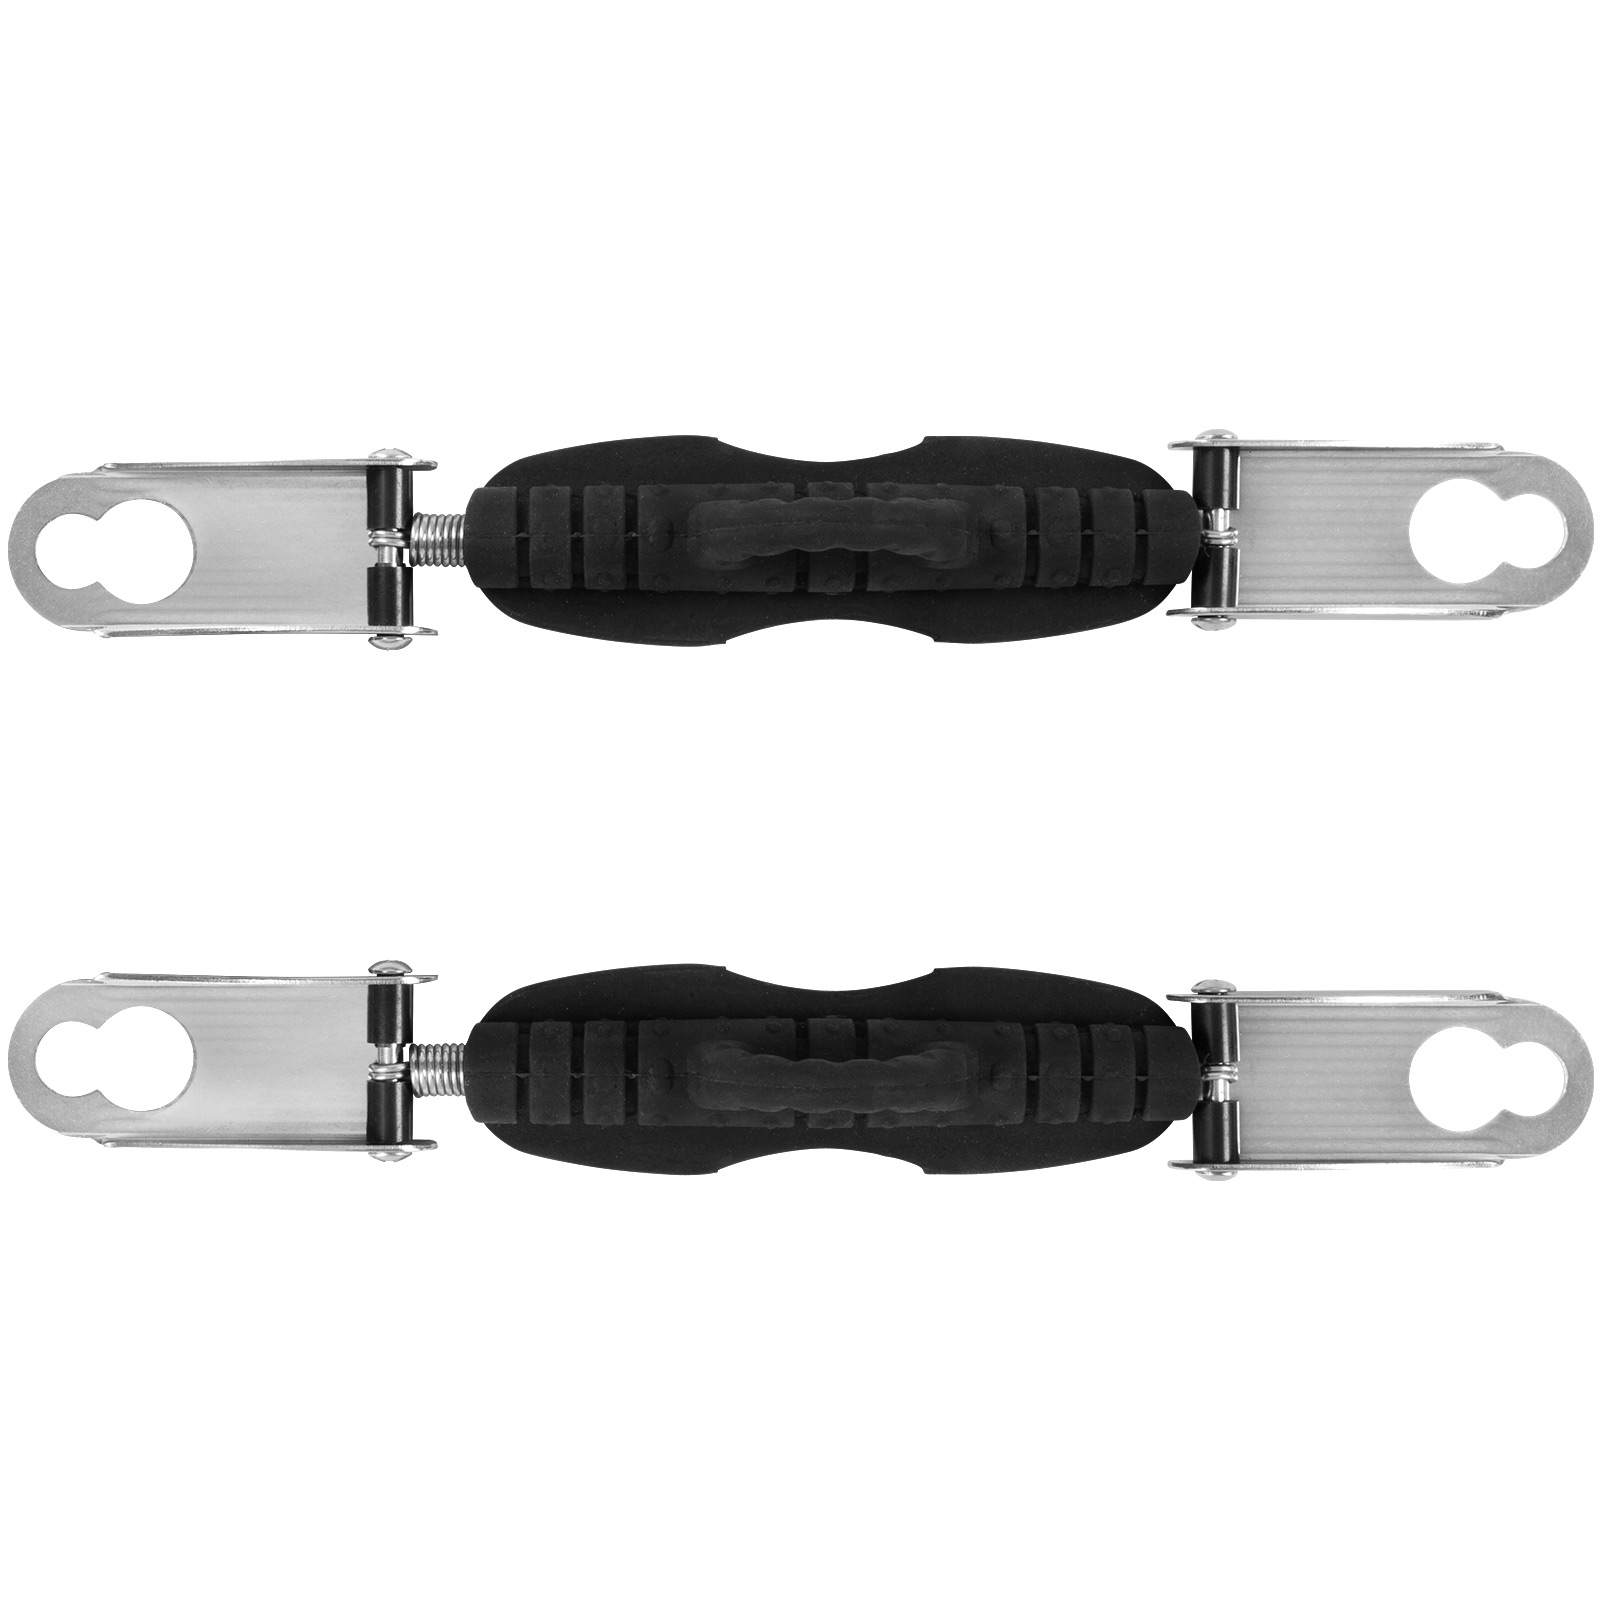 Spring Fin Strap with Stainless Steel Clip On Buckles